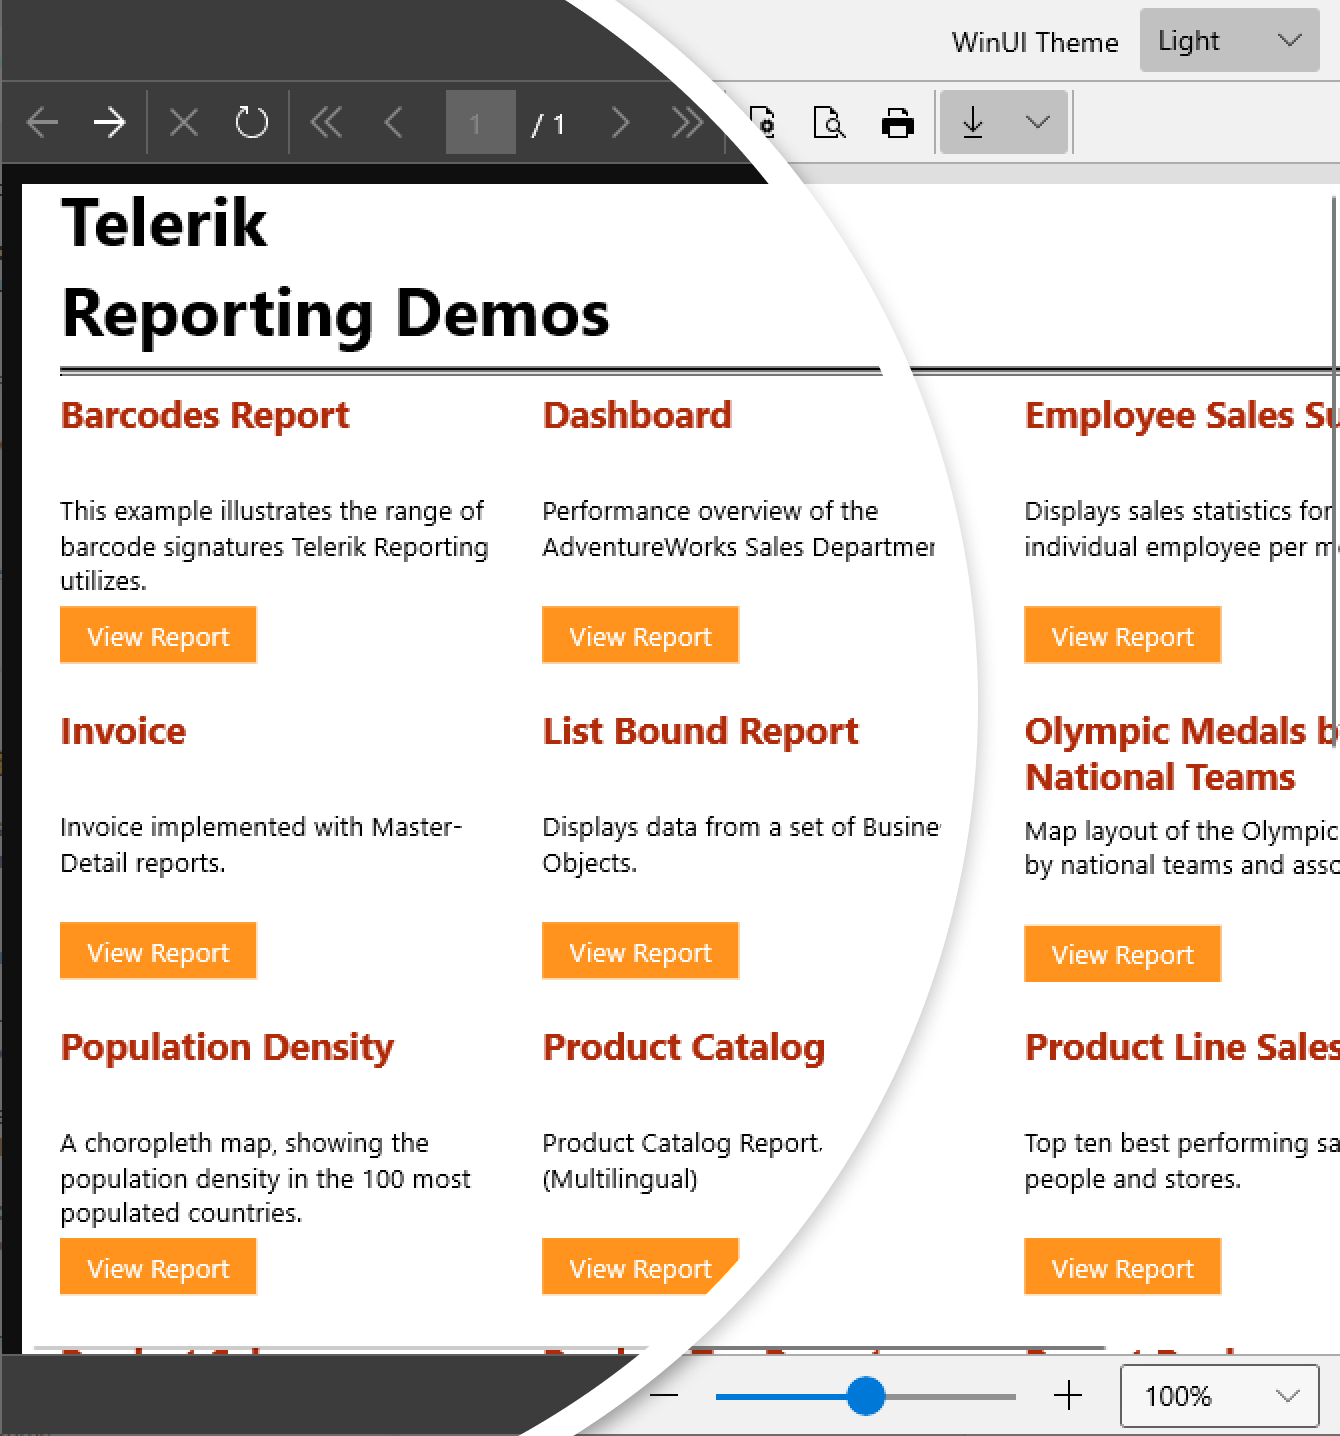 ReportViewer with Light and Dark custom themes